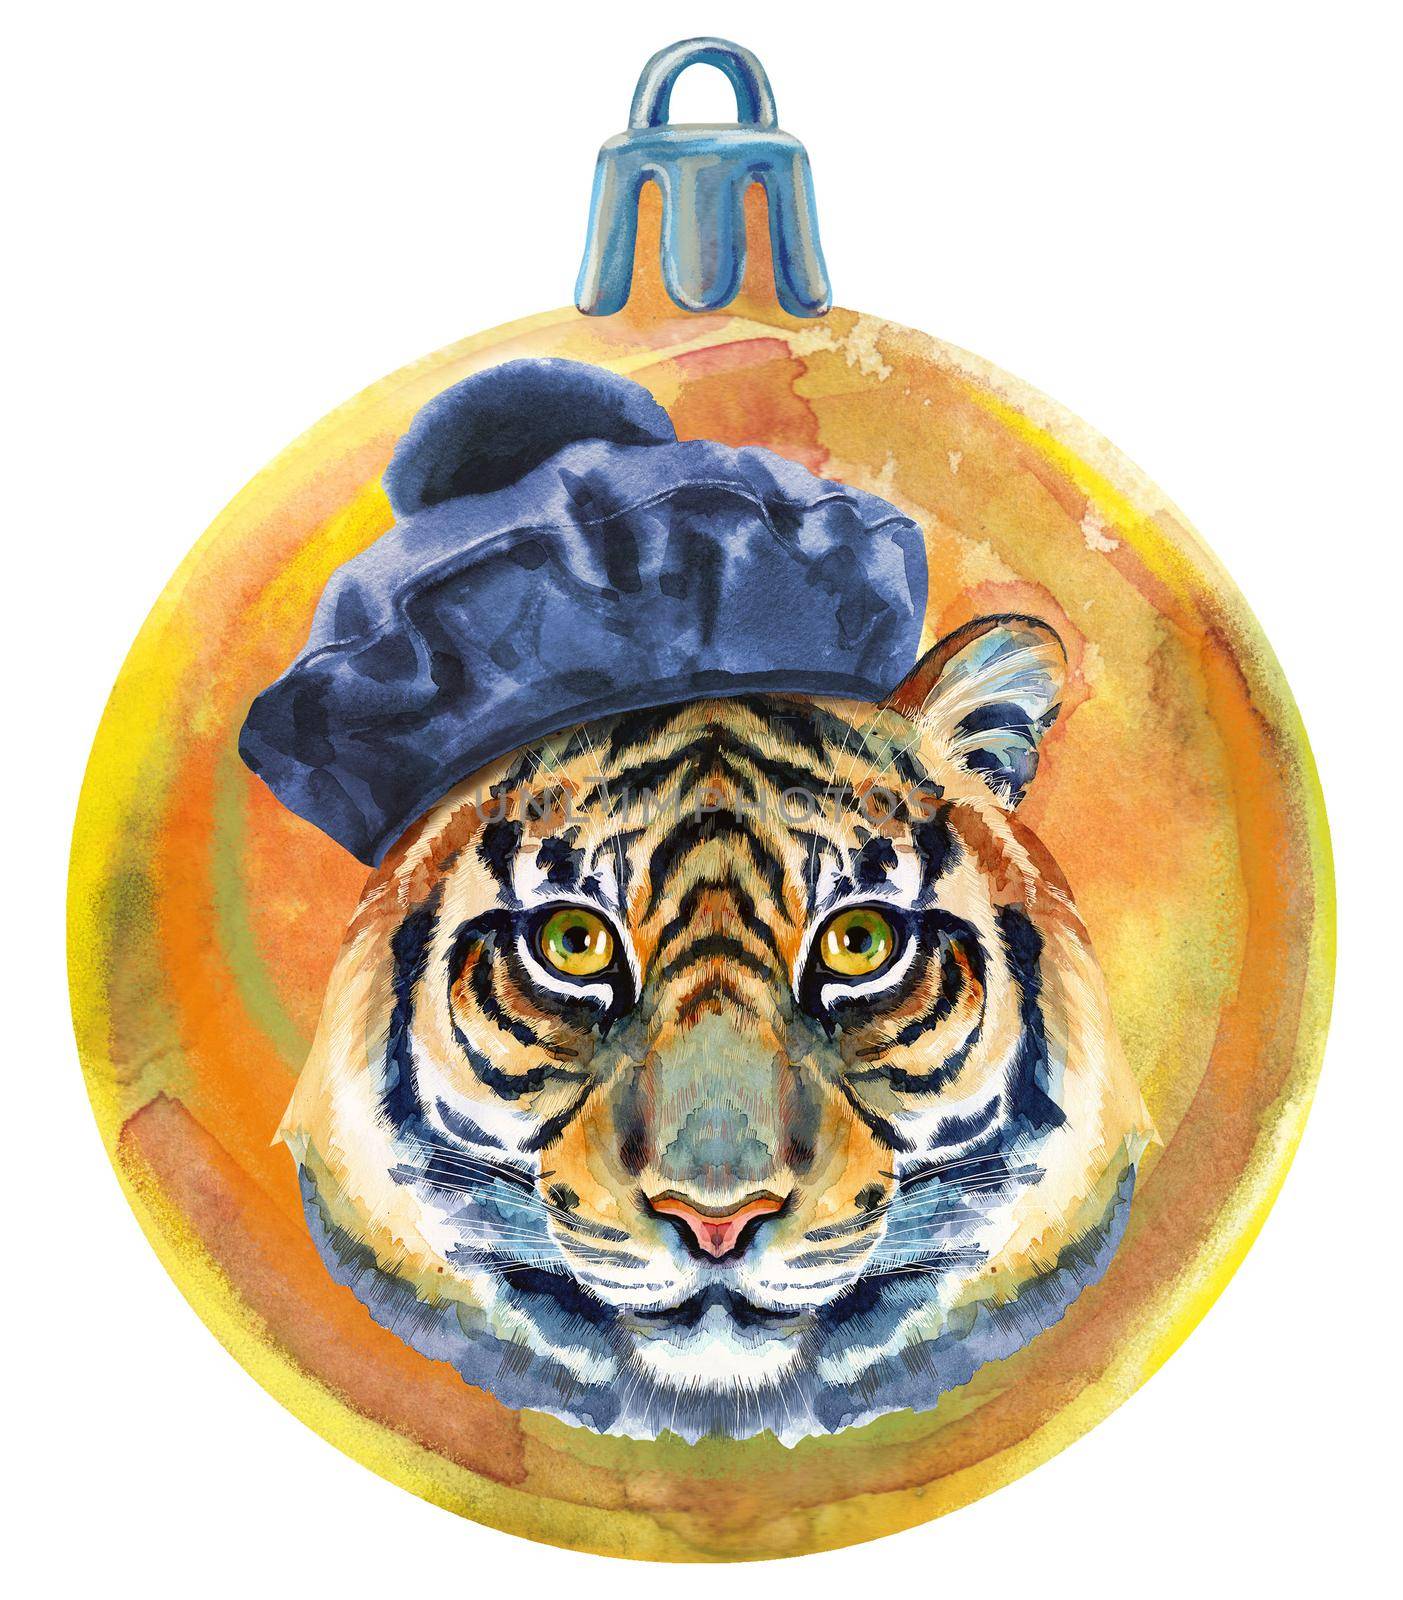 Watercolor Christmas ball with tiger isolated on a white background.